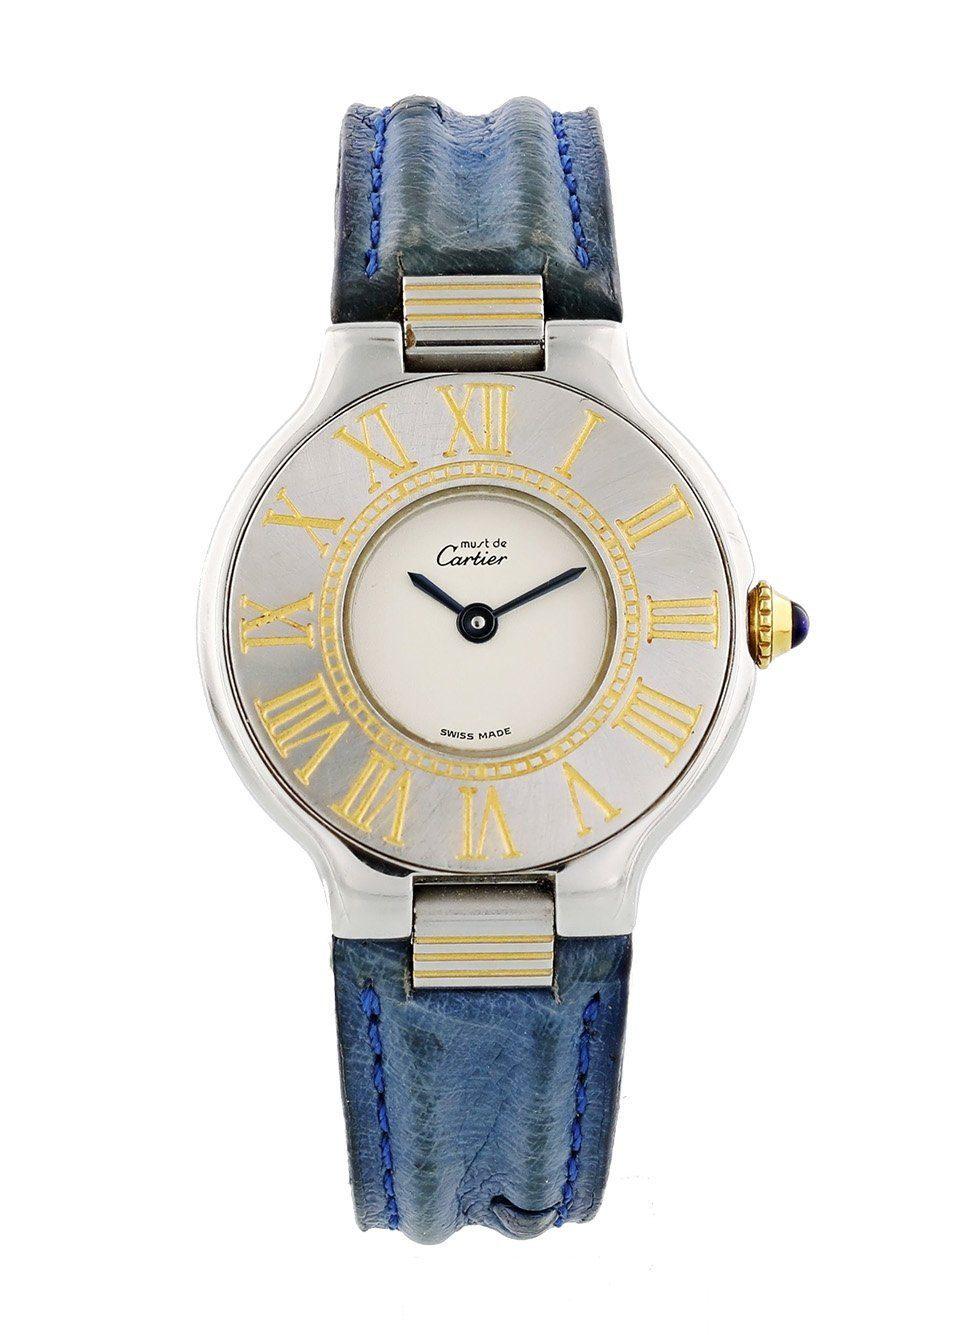 Cartier Must de Cartier Ladies Watch.
28mm Stainless Steel case. 
Stainless Steel Stationary bezel. 
White dial with  Blue steel hands. 
Leather Ostrich Strap with Fold Over Clasp. 
Will fit up to a 6-inch wrist. 
Sapphire Crystal, Stainless steel